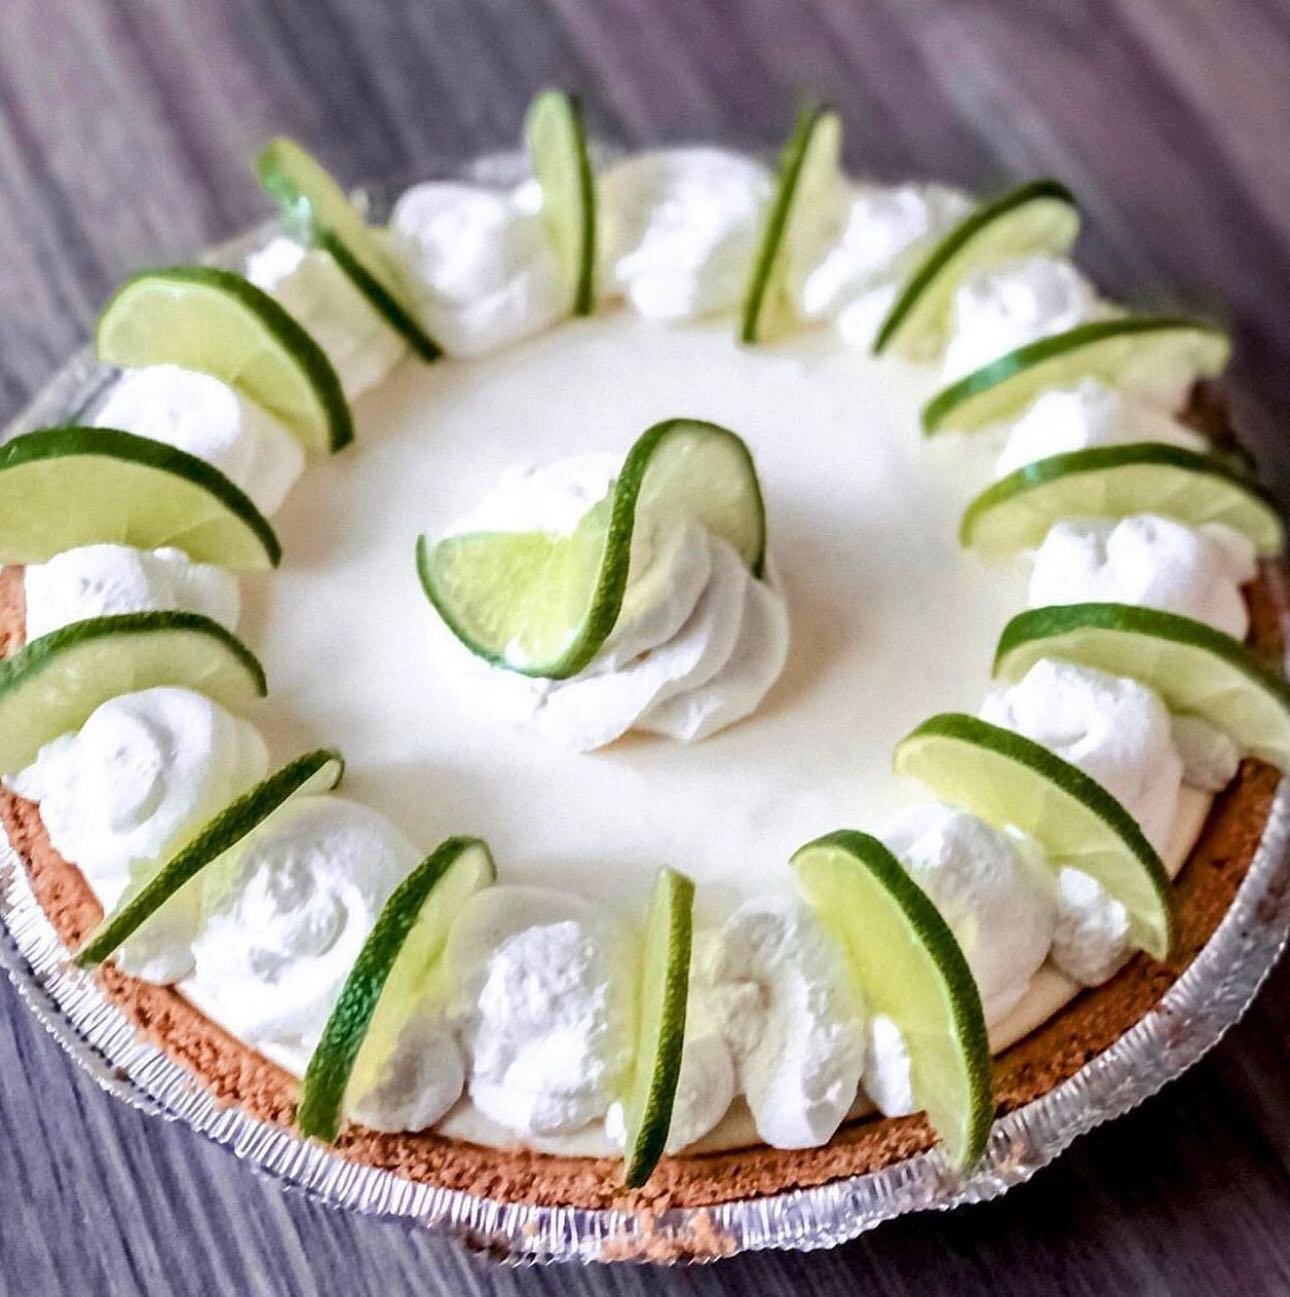 It&rsquo;s almost Pi day🥧😉 the EASIEST no bake GF Key Lime Pie, recipe below!

Pie Ingredients:
Gluten-free graham cracker crust (I use Mi-del)
16 oz softened cream cheese
1 can sweetened condensed milk
⅓ C fresh squeezed key lime juice (regular li